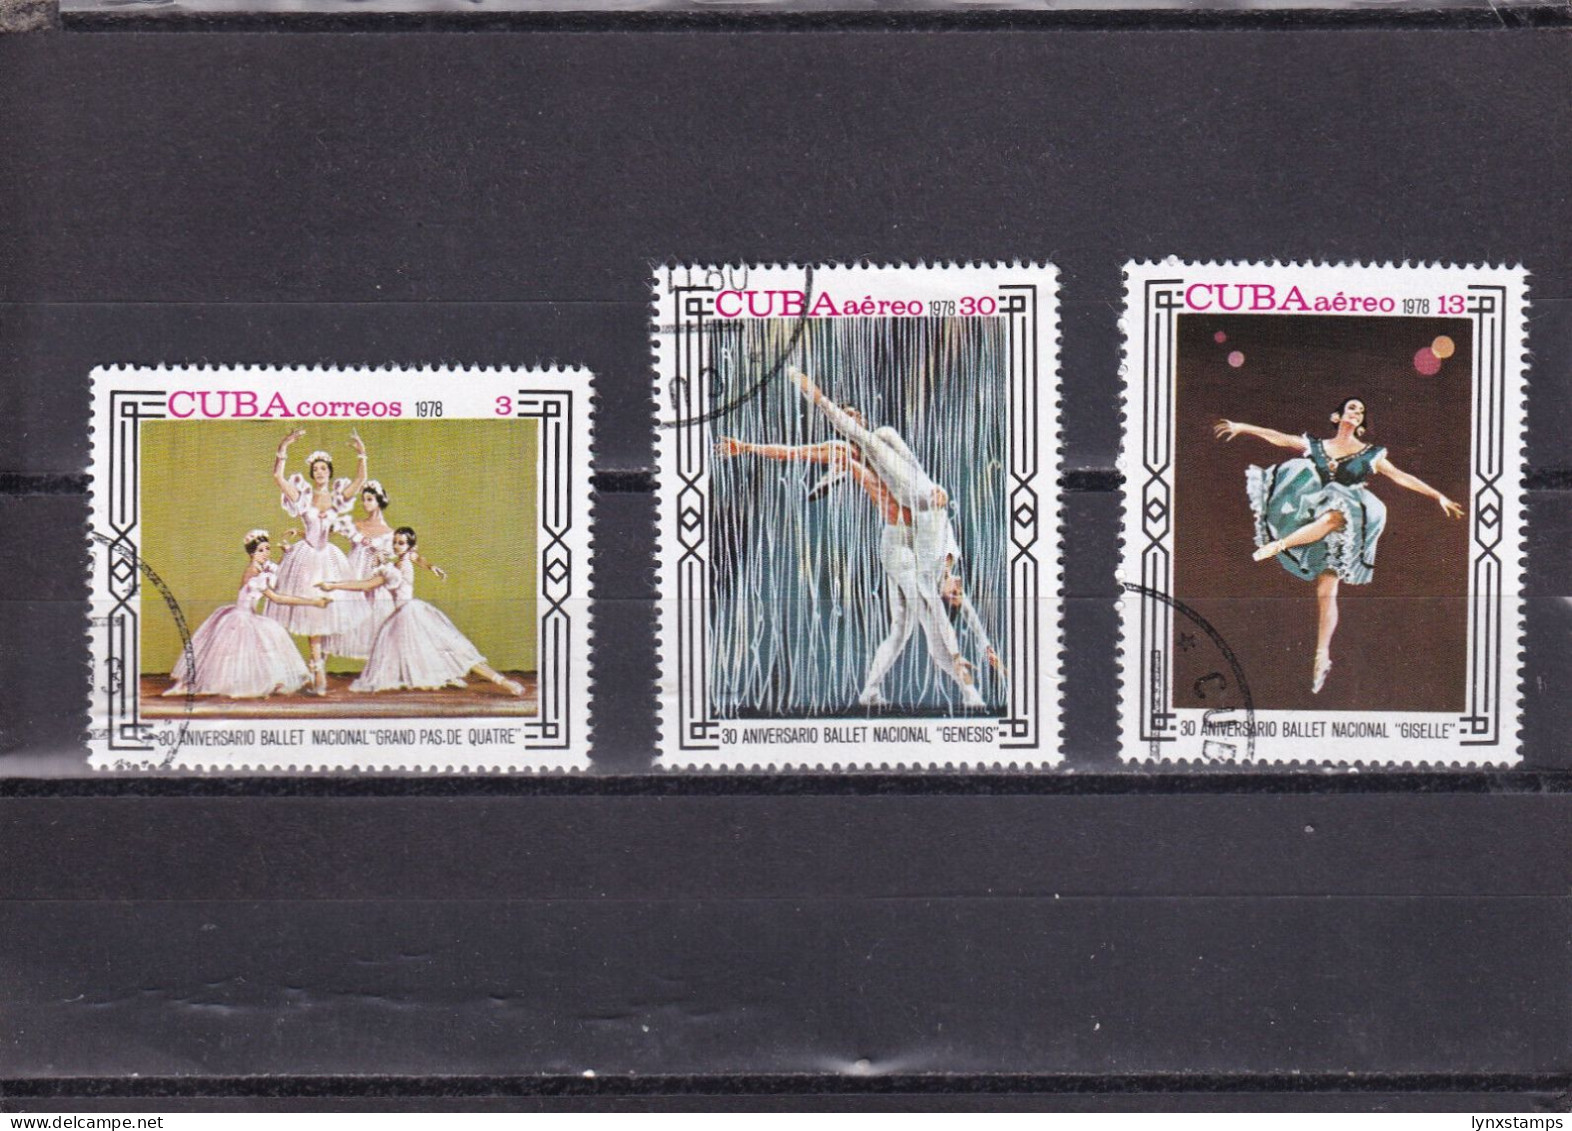 LI03 SCuba 1978 The 30th Anniversary Of The National Ballet Company Used Stamps - Usados